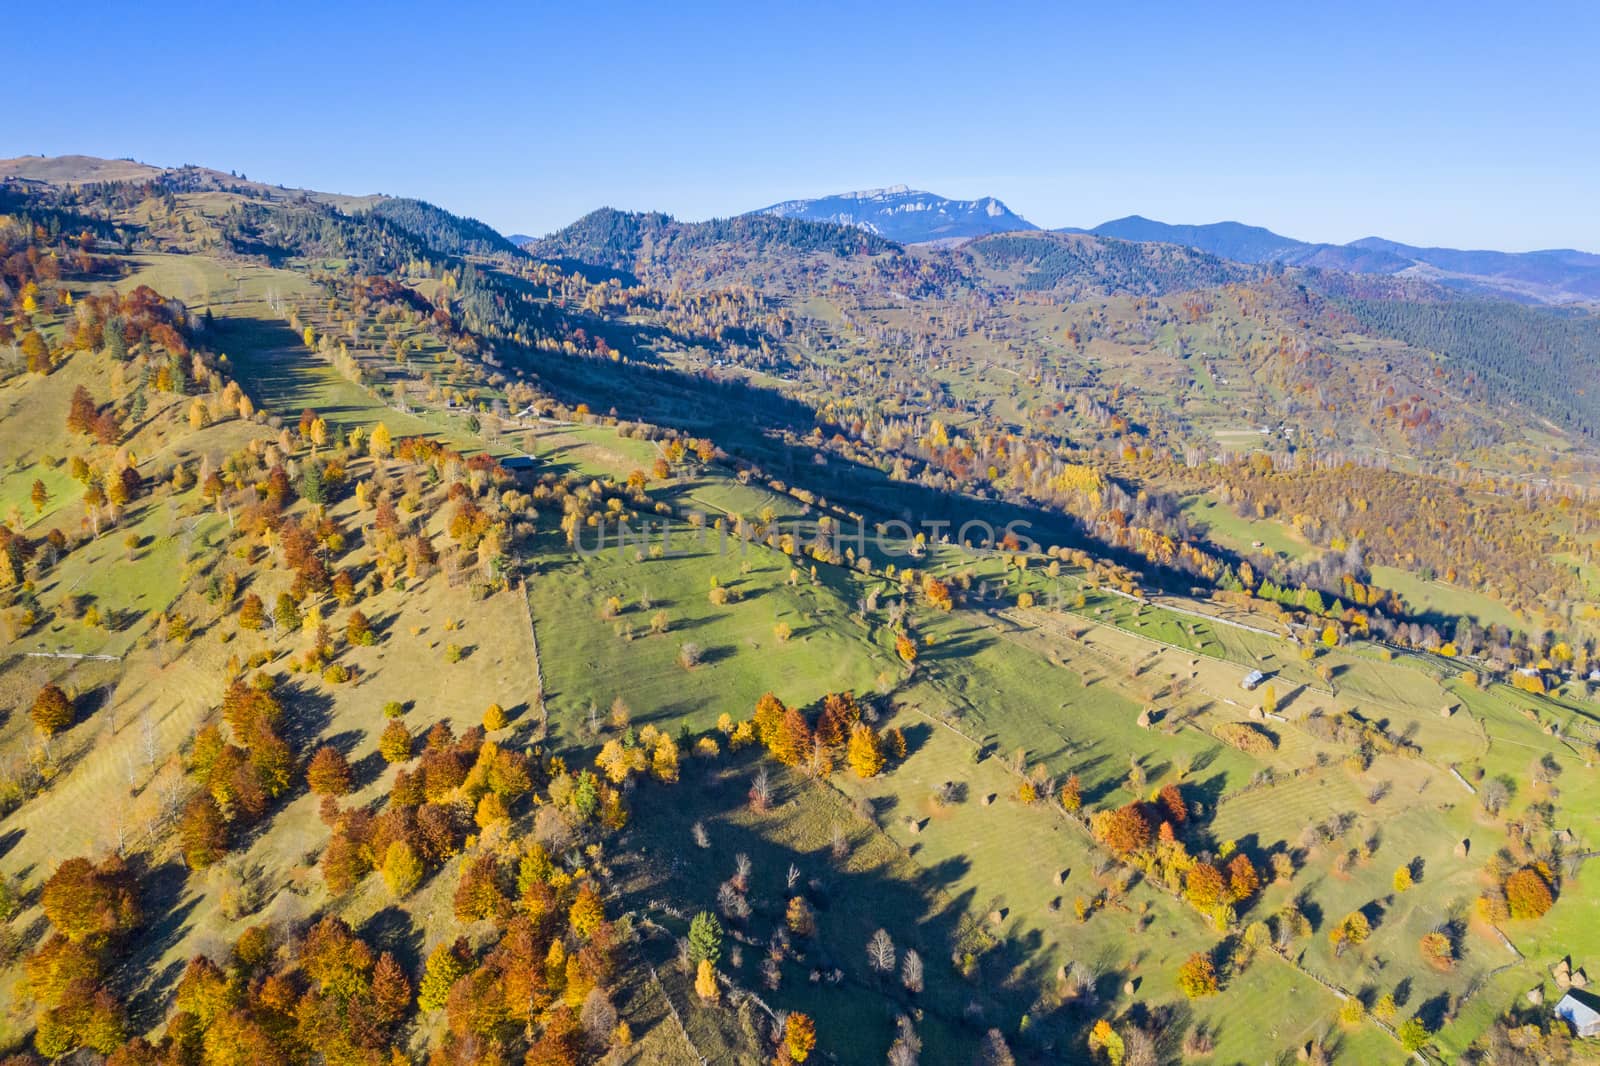 Aerial view of pastures and forest in autumn colors and the blue sky.